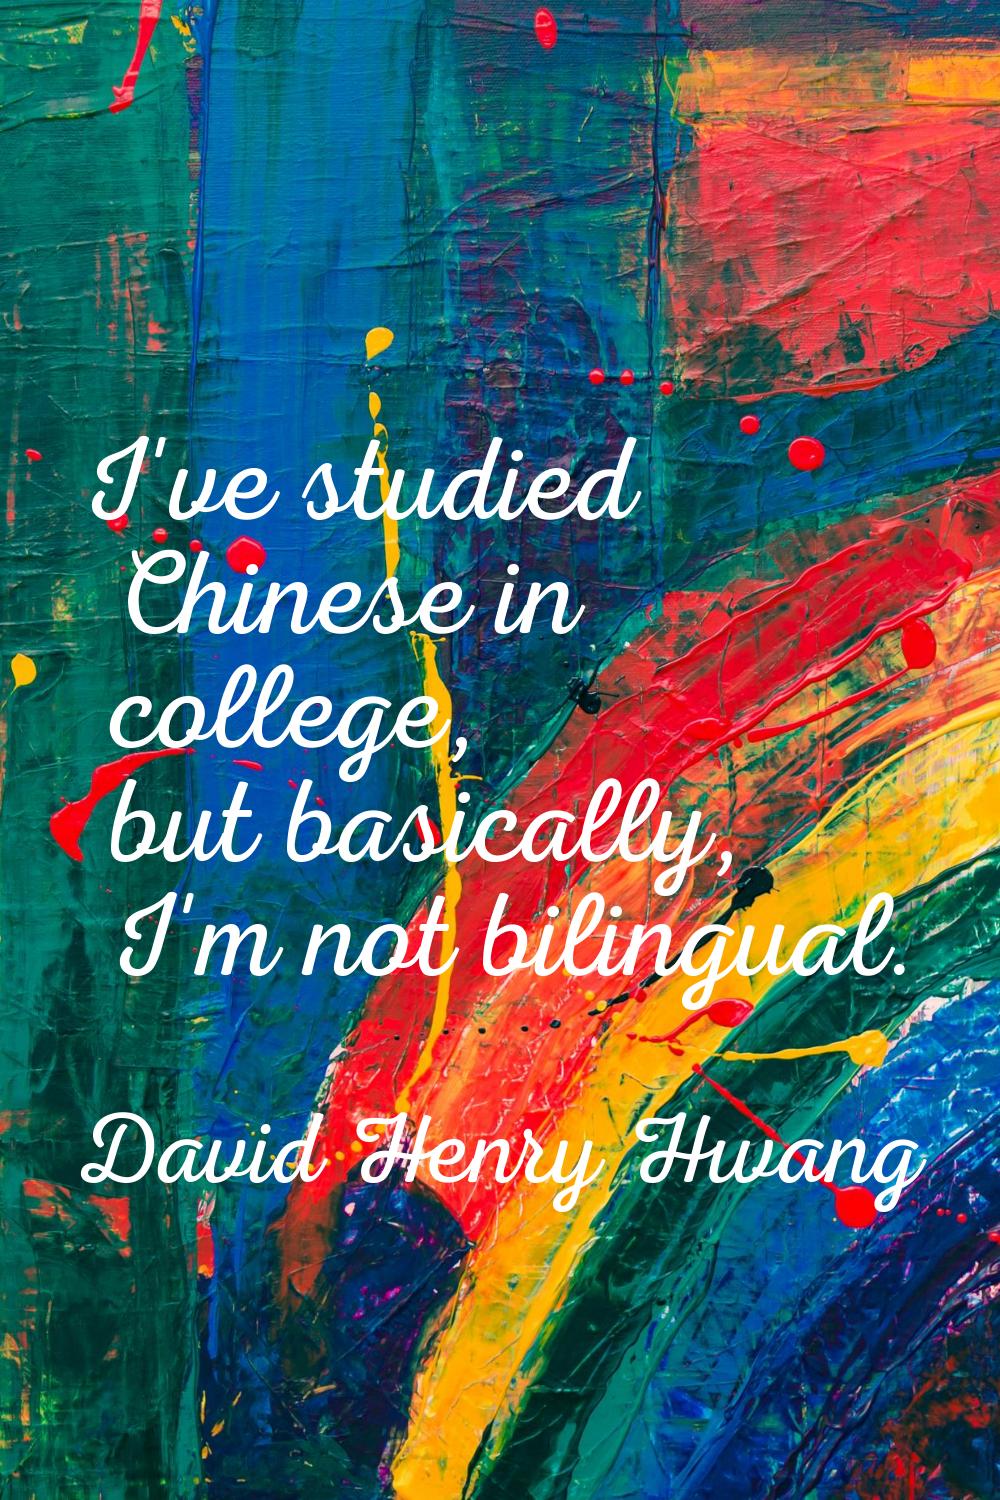 I've studied Chinese in college, but basically, I'm not bilingual.